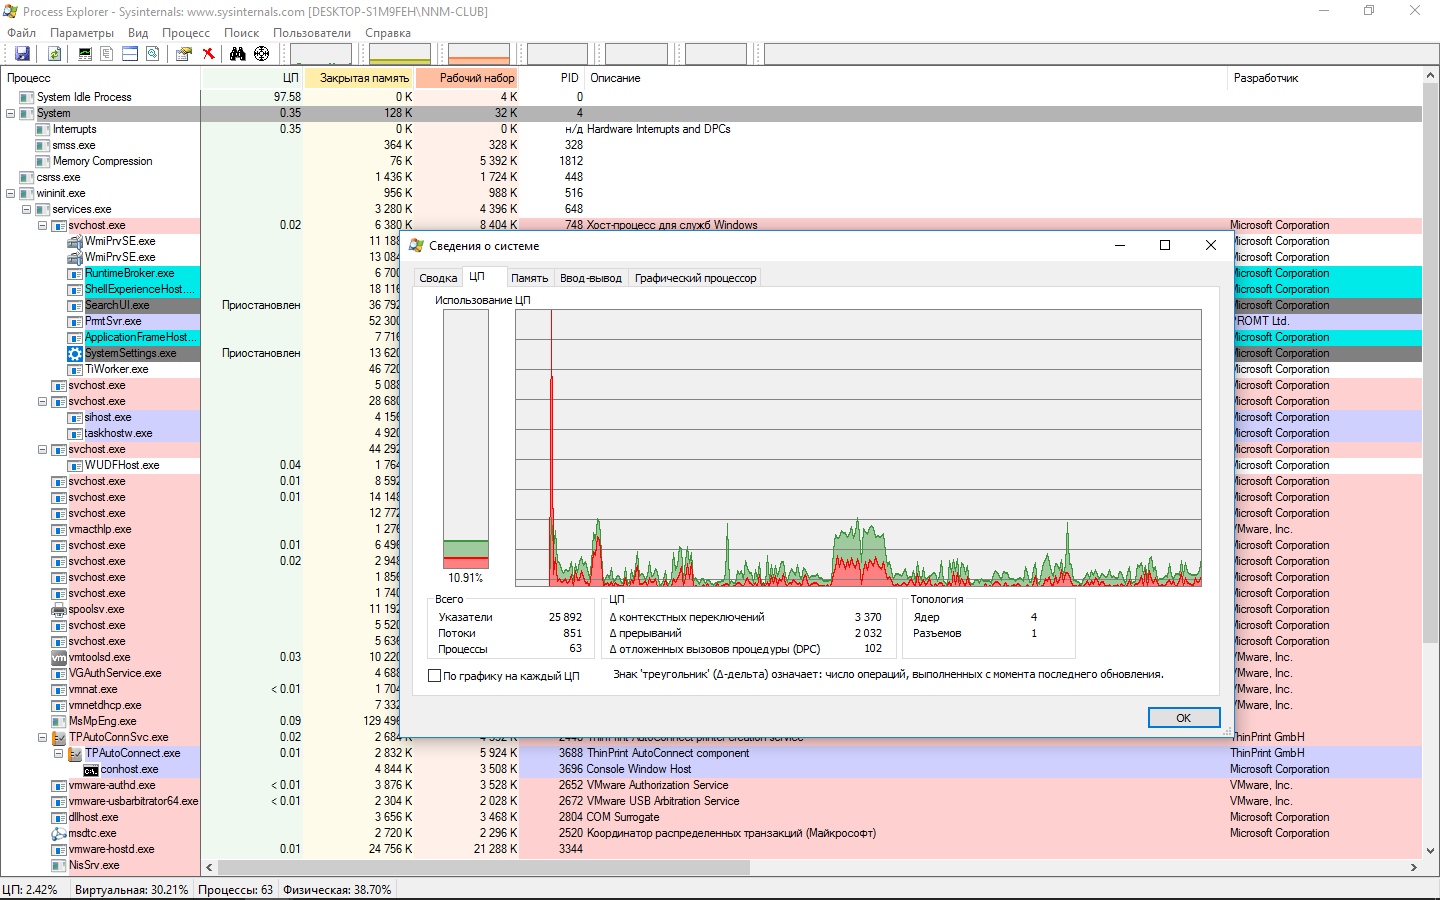 instal the new version for android Process Explorer 17.05